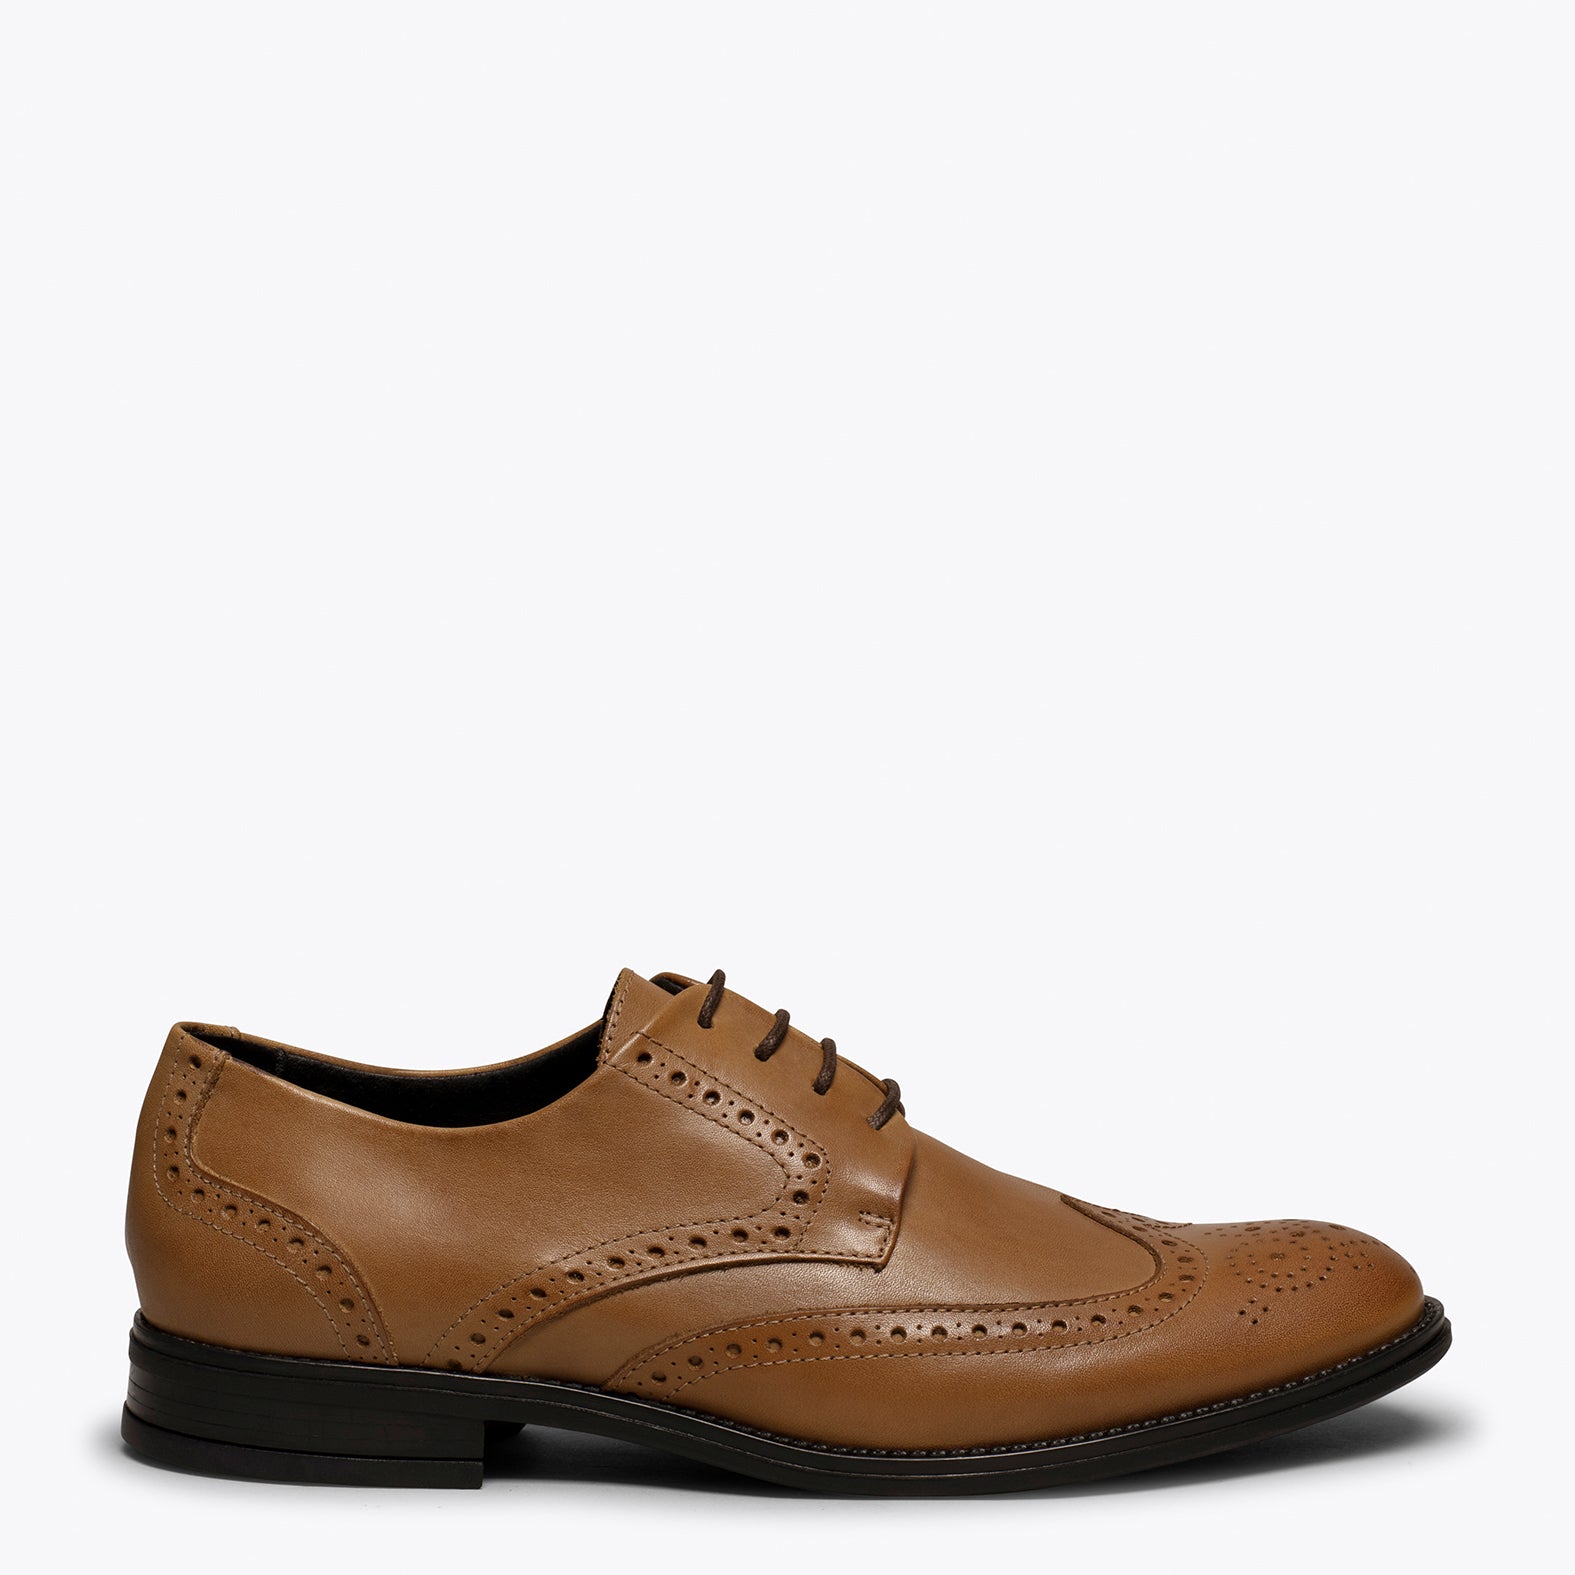 OXFORD - Chaussure homme CAMEL avec coupe anglaise